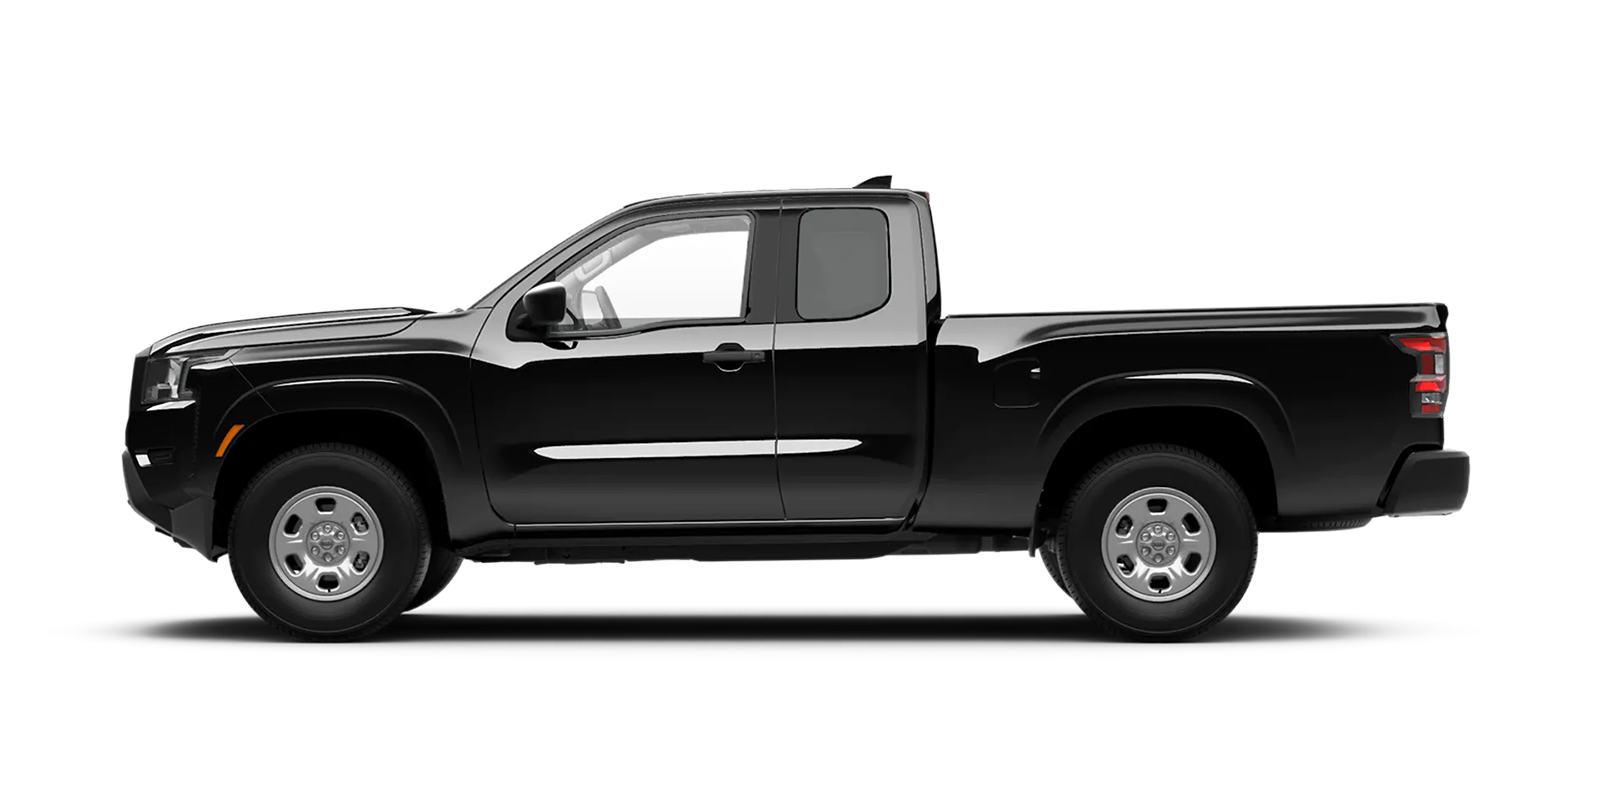 2022 Frontier King Cab S 4x4 in Super Black | Rolling Hills Nissan in Saint Joseph MO